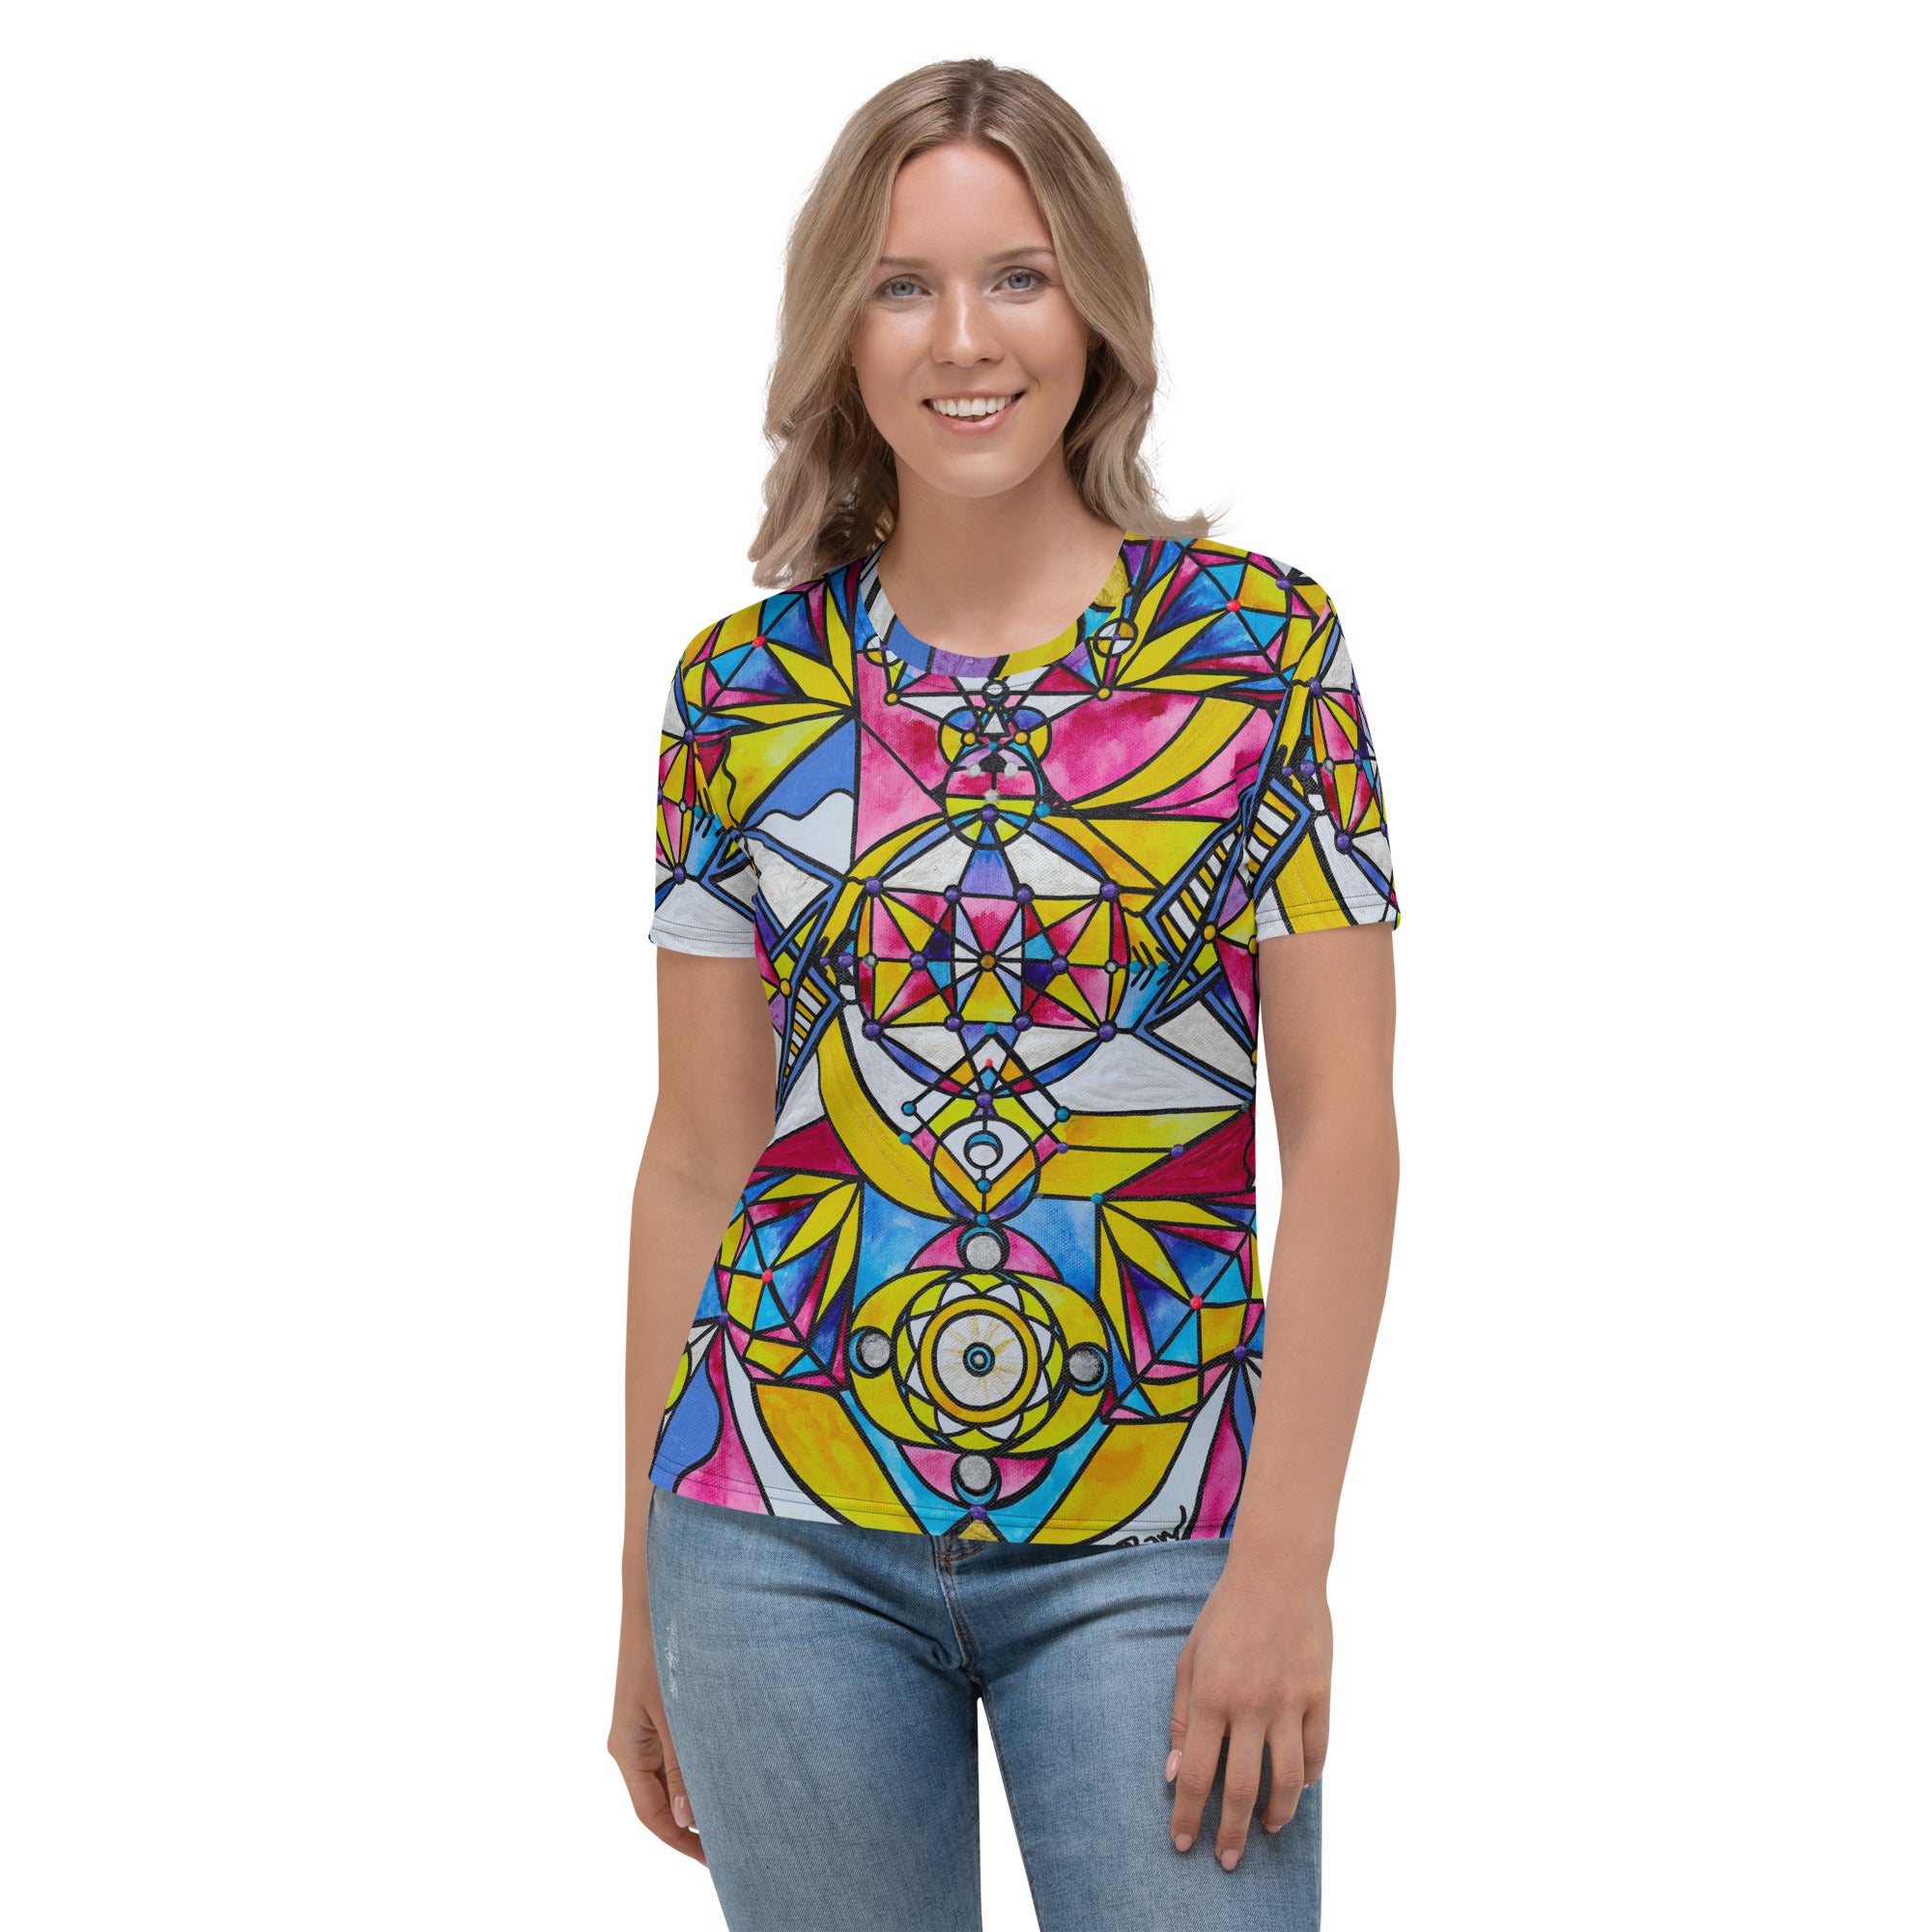 the-newest-page-on-the-internet-to-buy-sanat-kumara-consciousness-womens-t-shirt-hot-on-sale_0.jpg